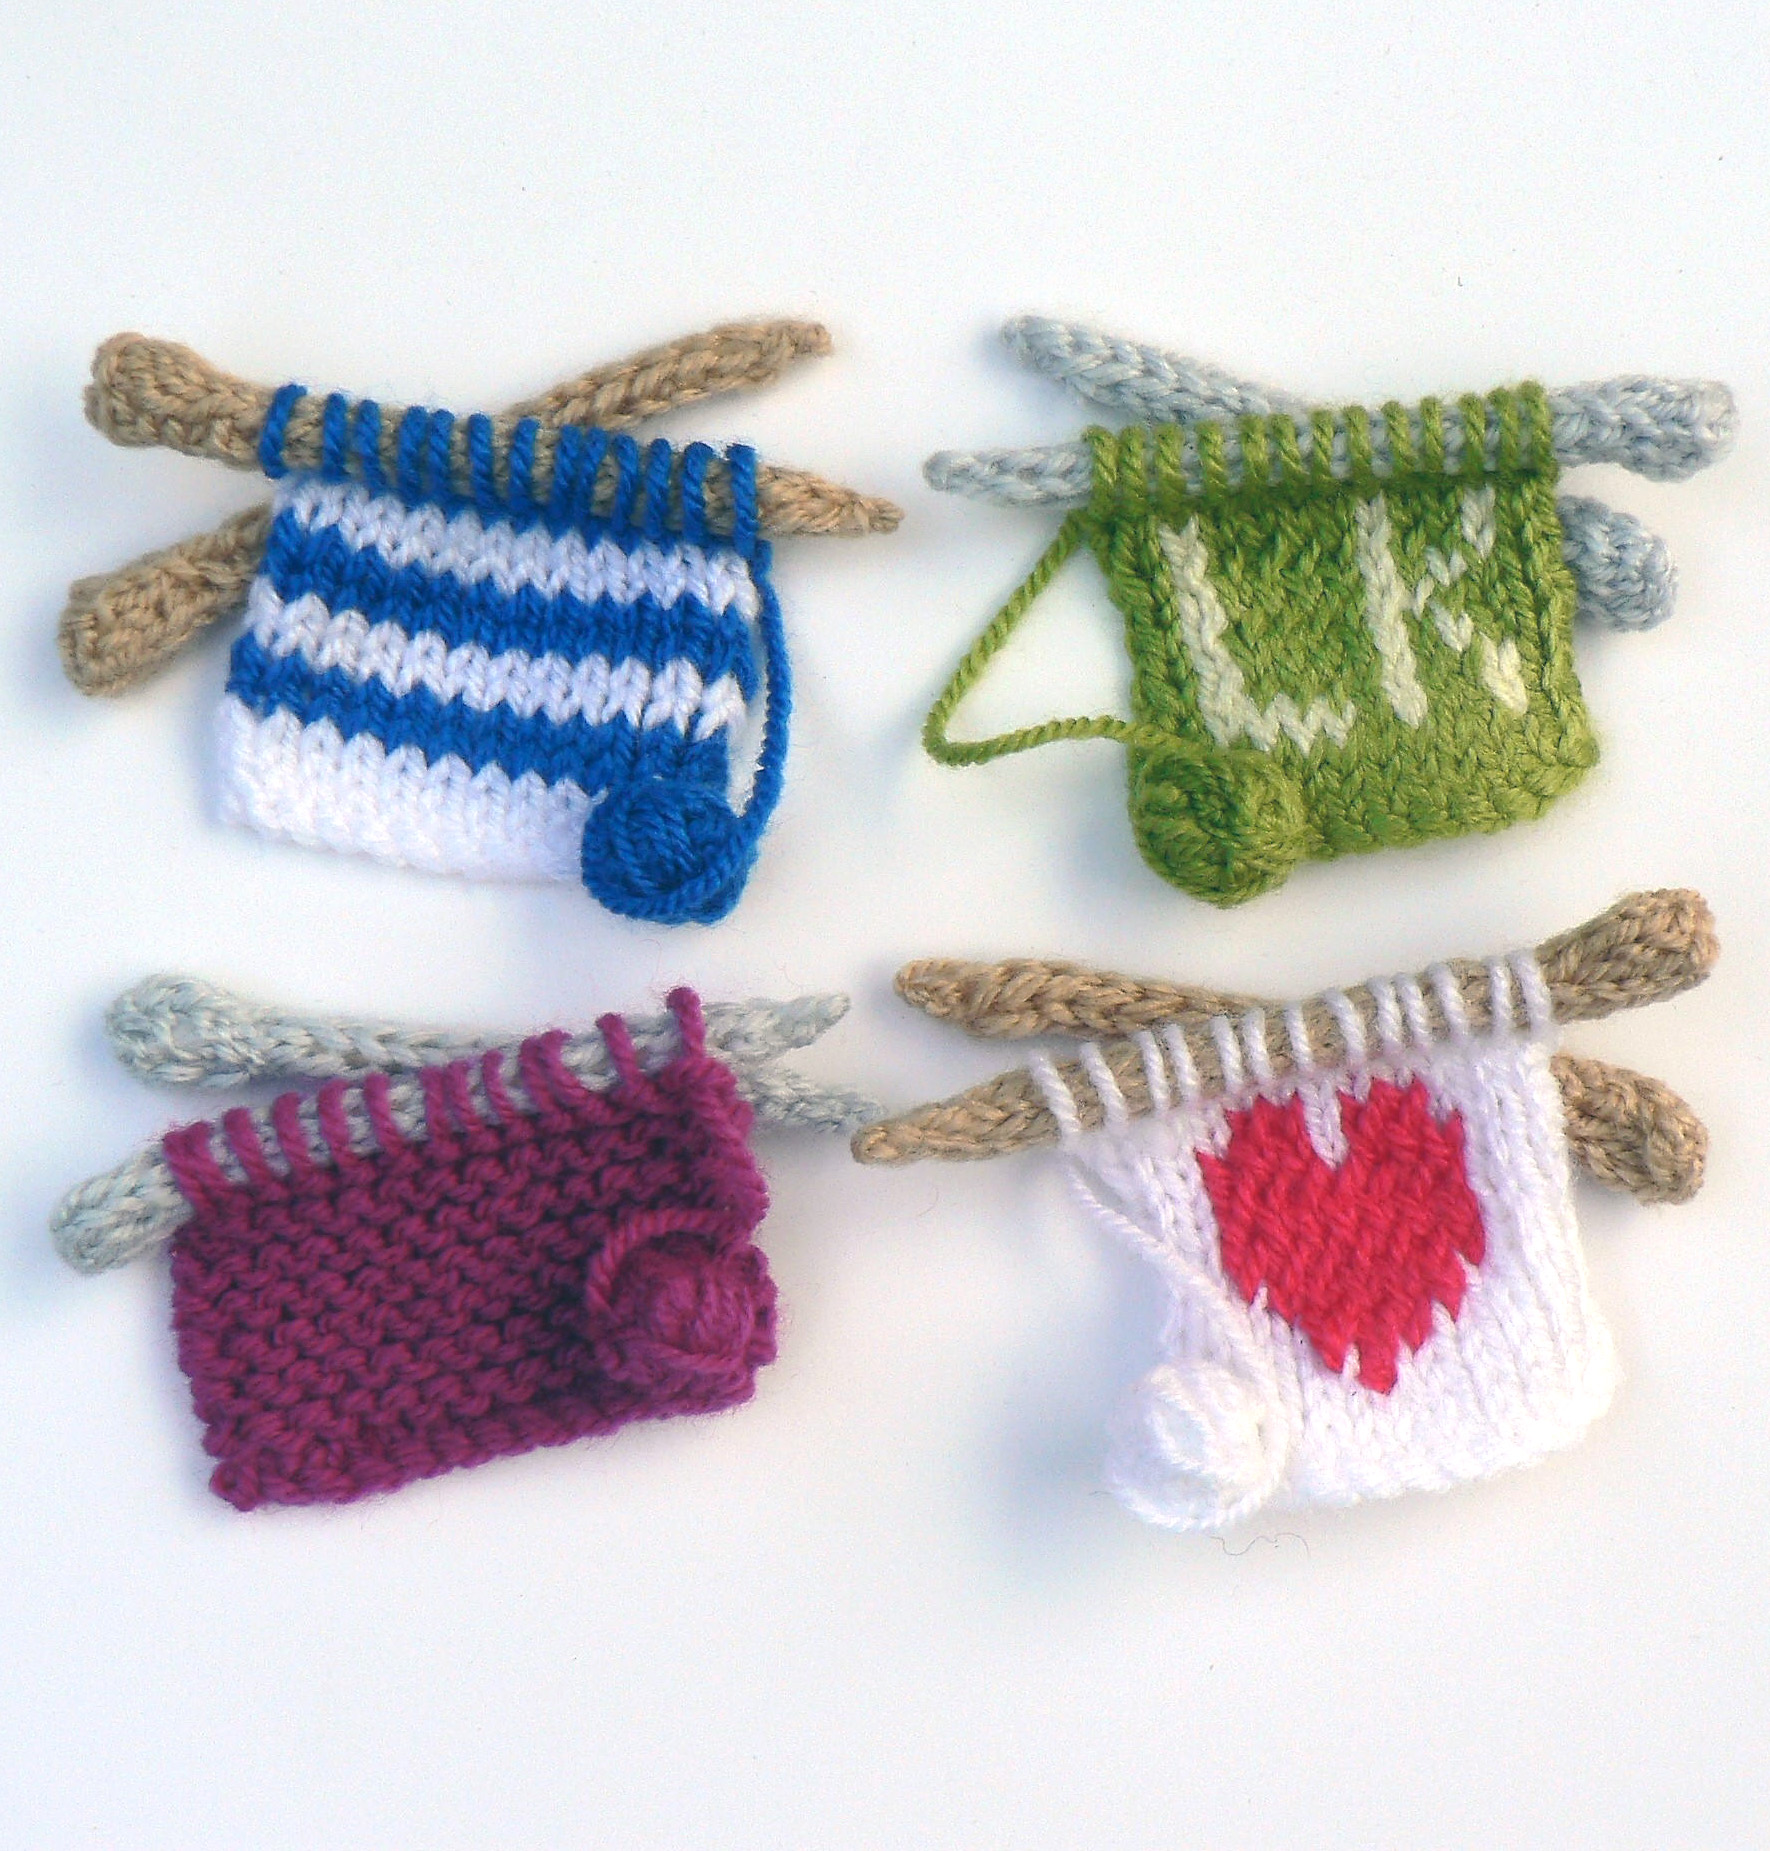 Knitting Pattern for Knitting Themed Pins